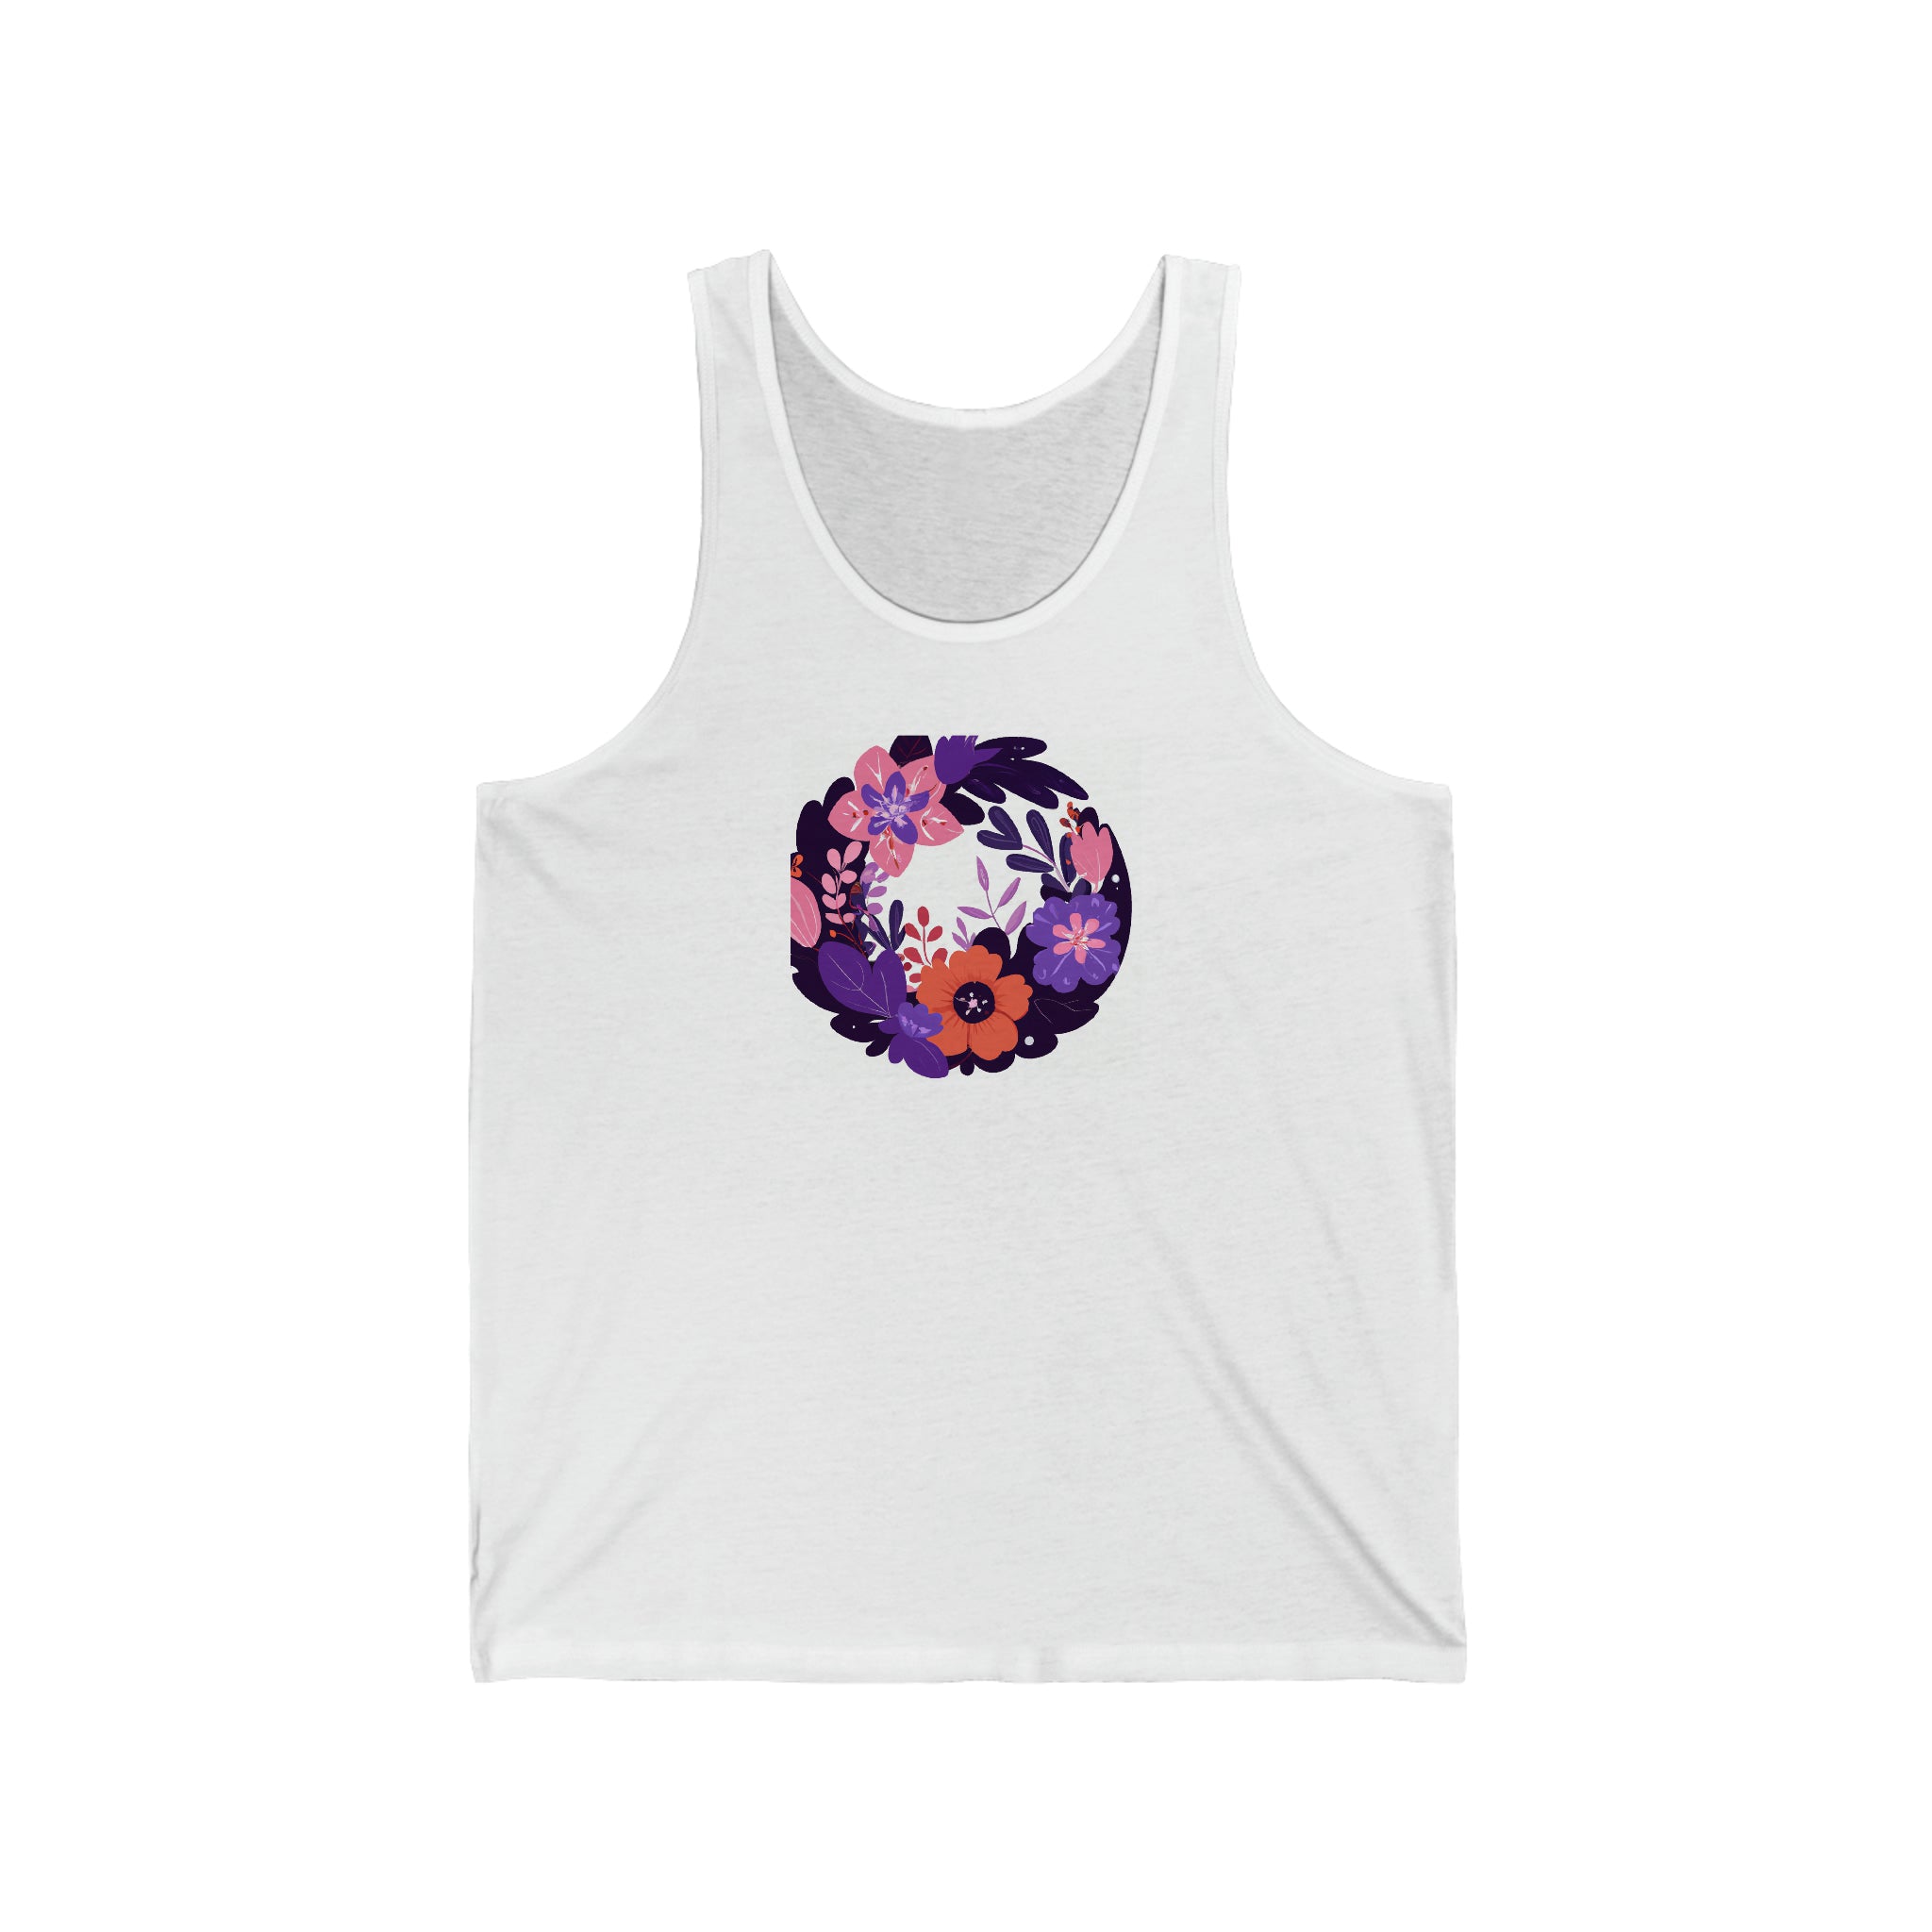 "Summersong: A Celebration of Sun, Sweat, and Joy"- Tank Top